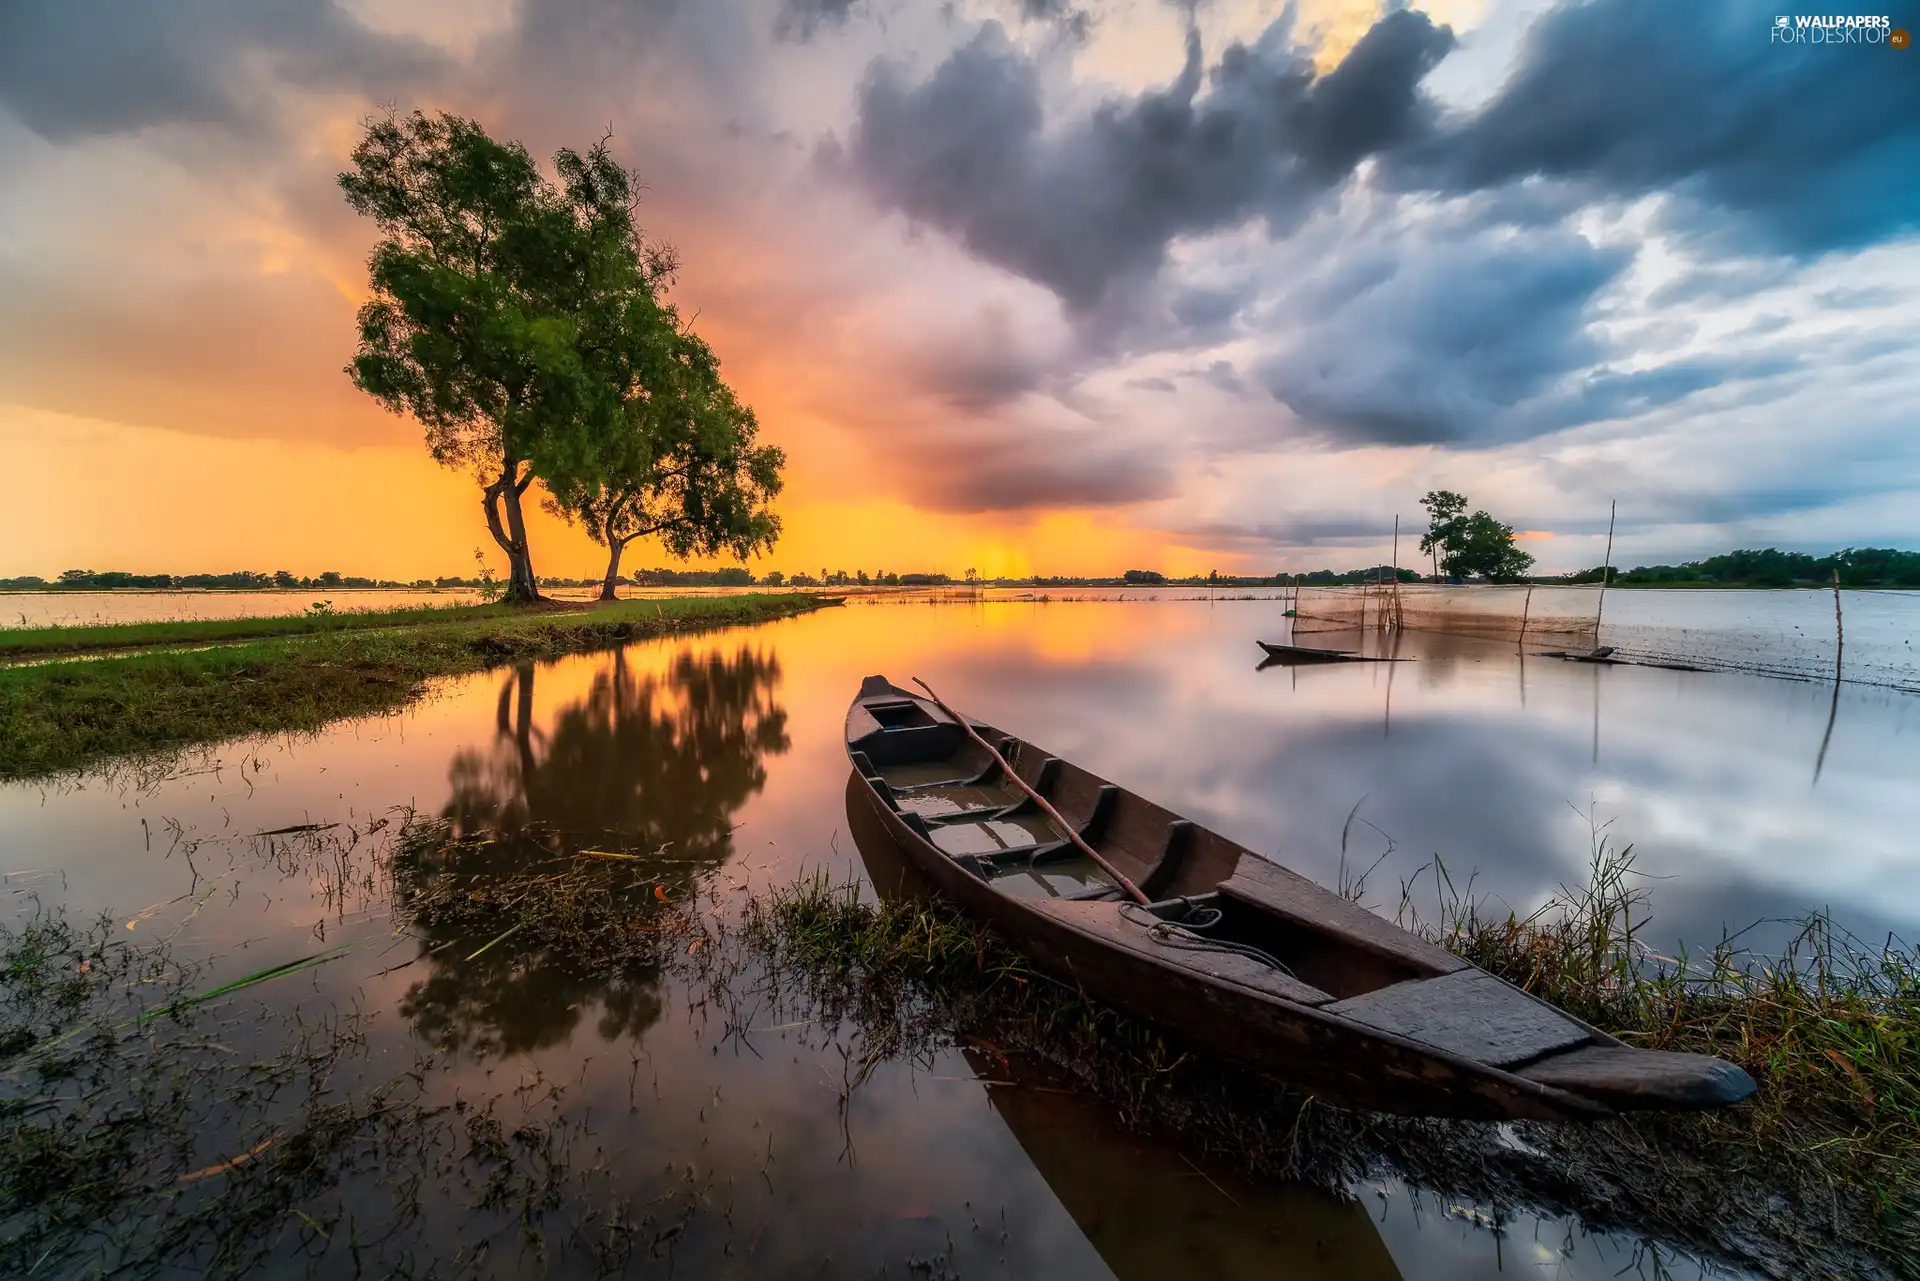 trees, Boat, clouds, grass, River, viewes, Great Sunsets